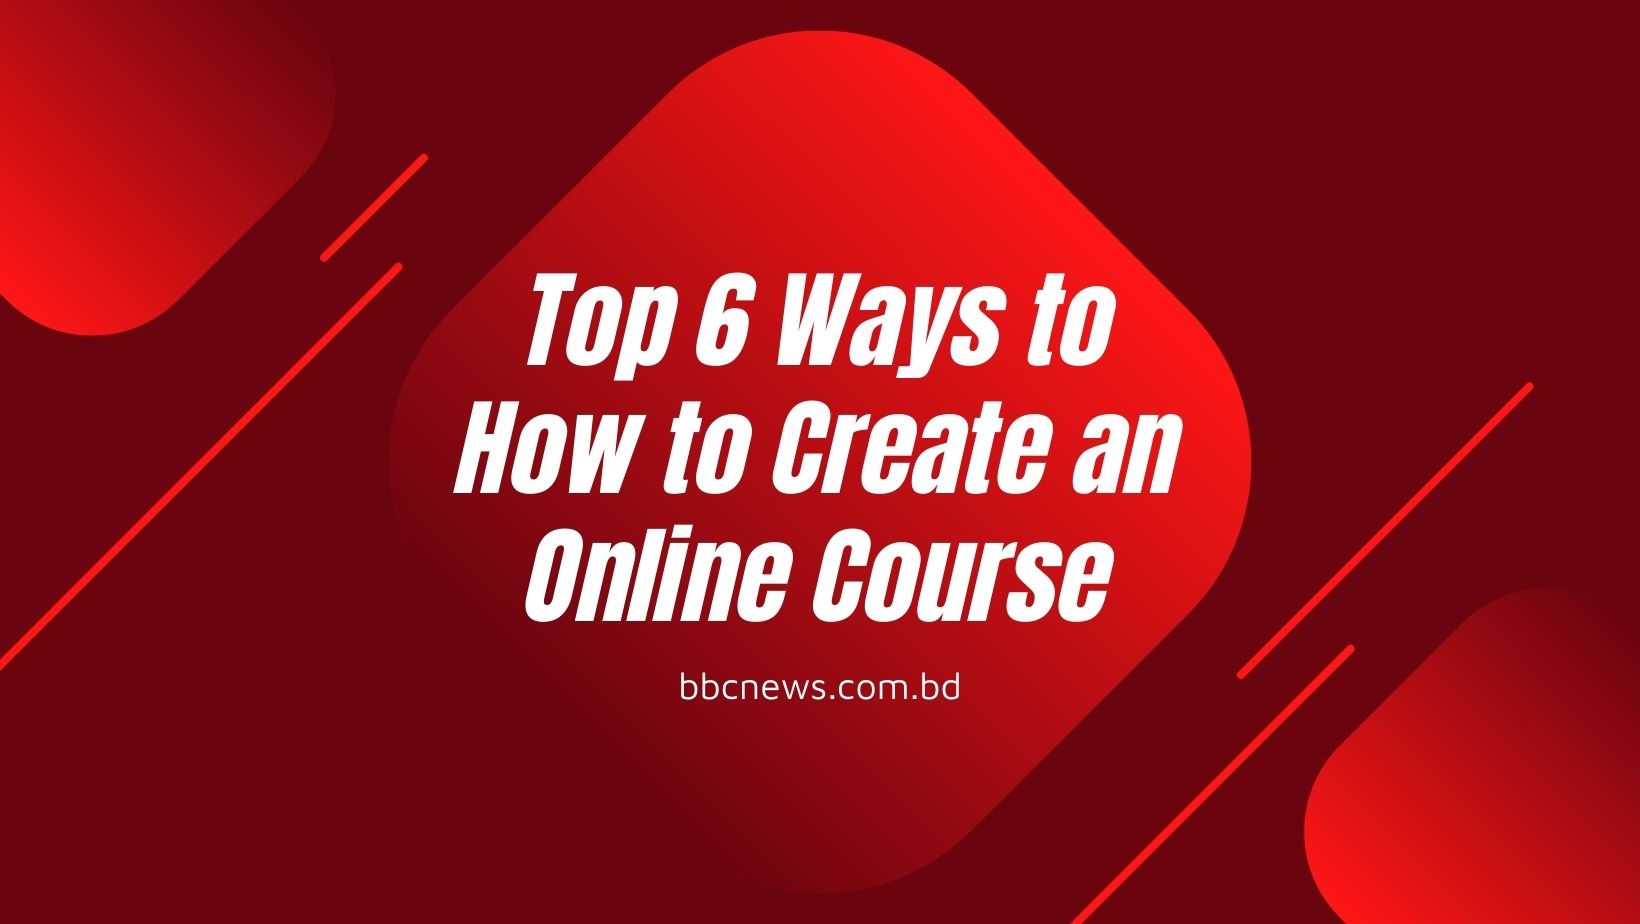 Top 6 Ways to How to Create an Online Course